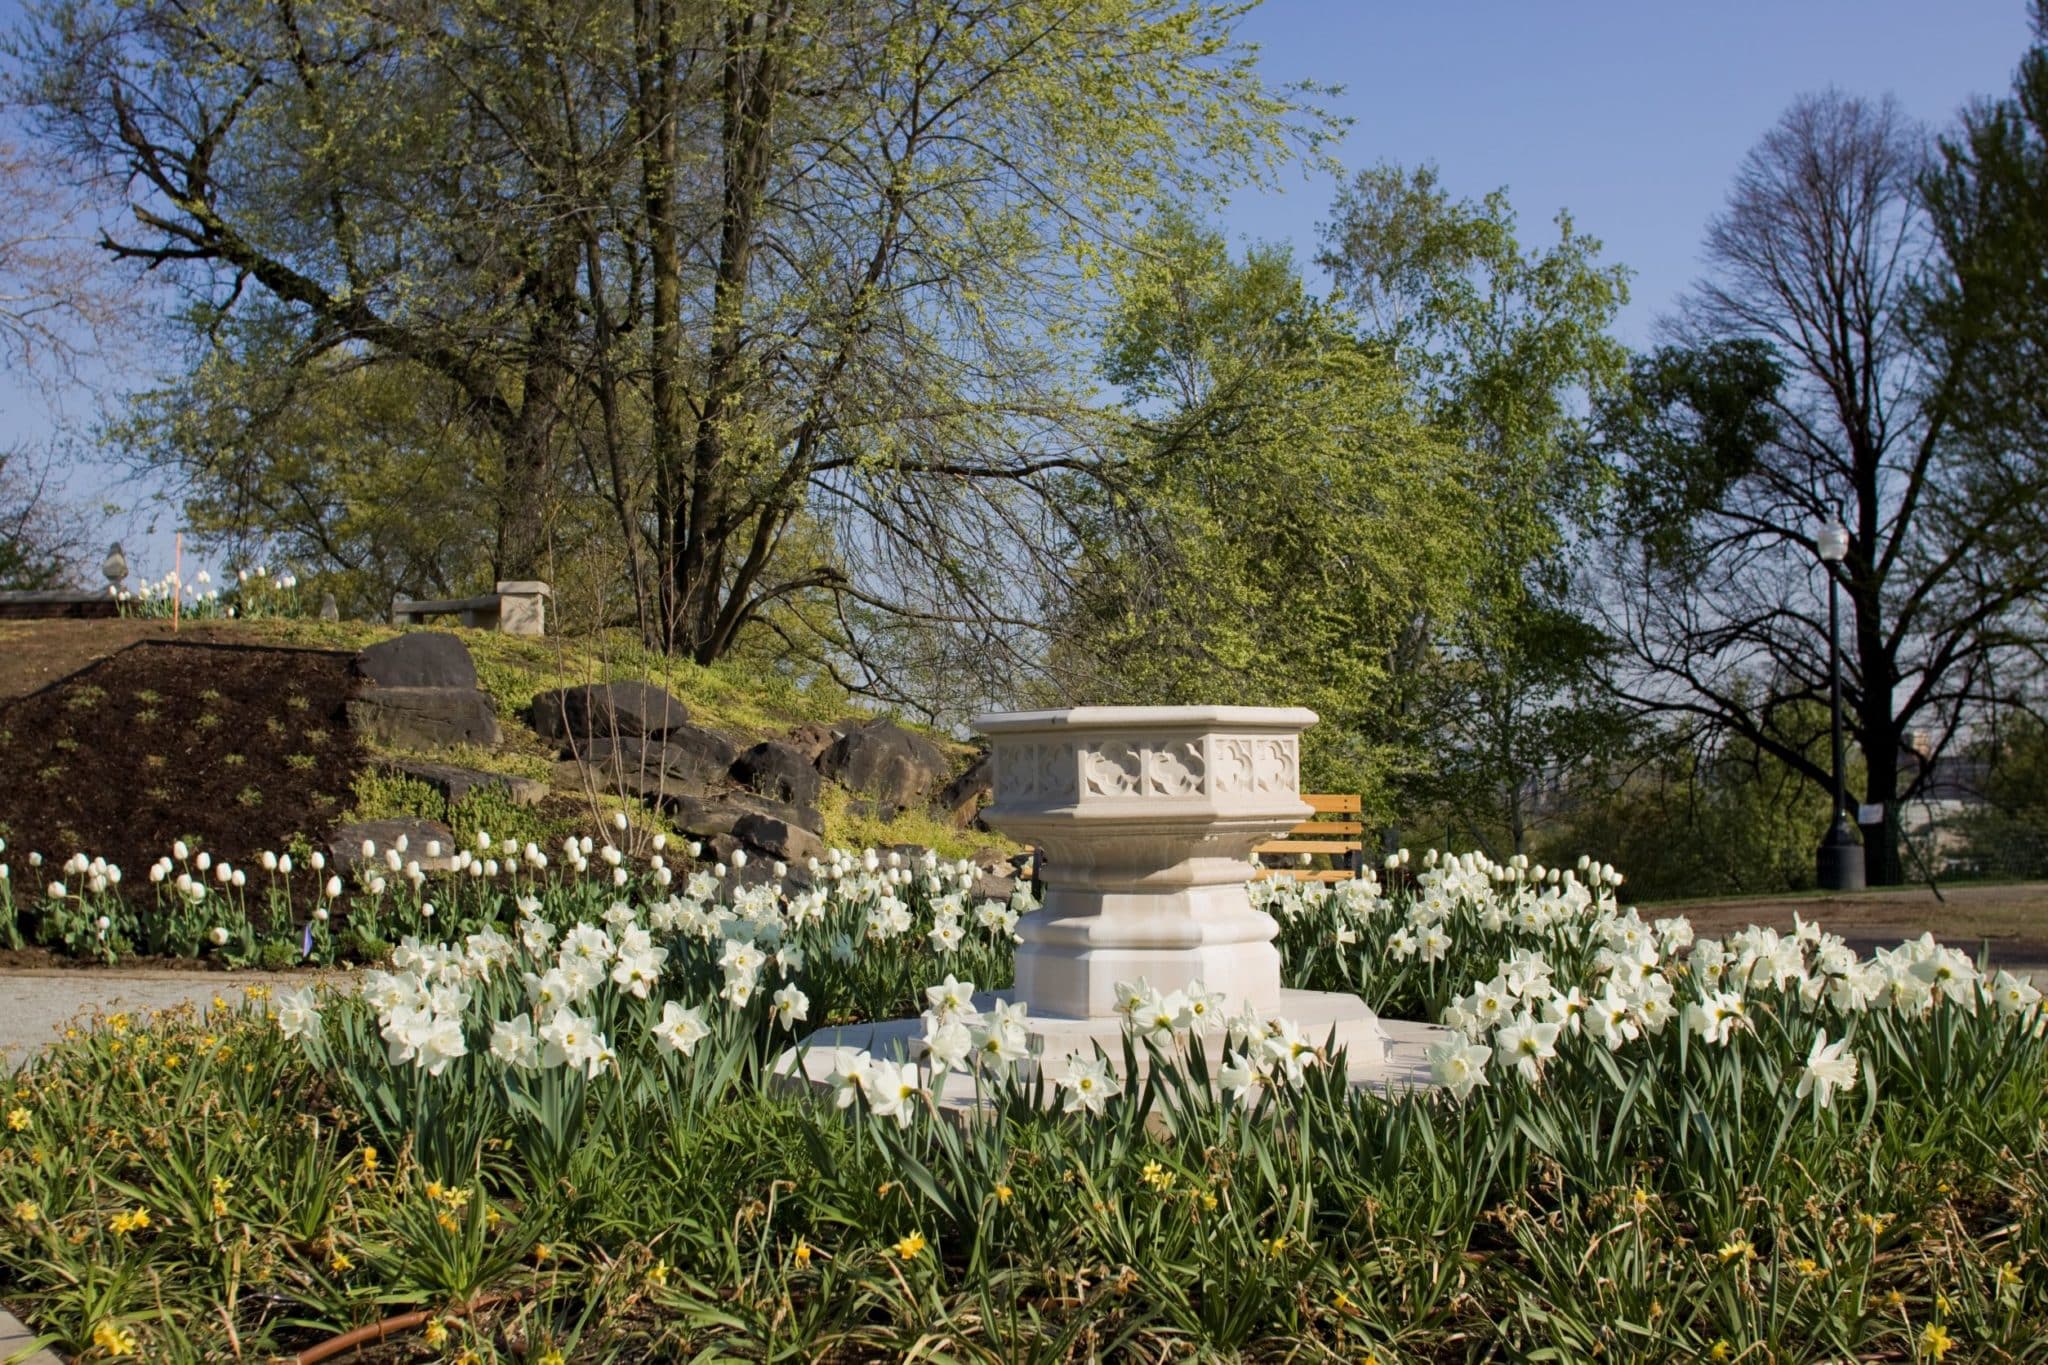 Springtime in the Pittsburgh Parks Conservancy